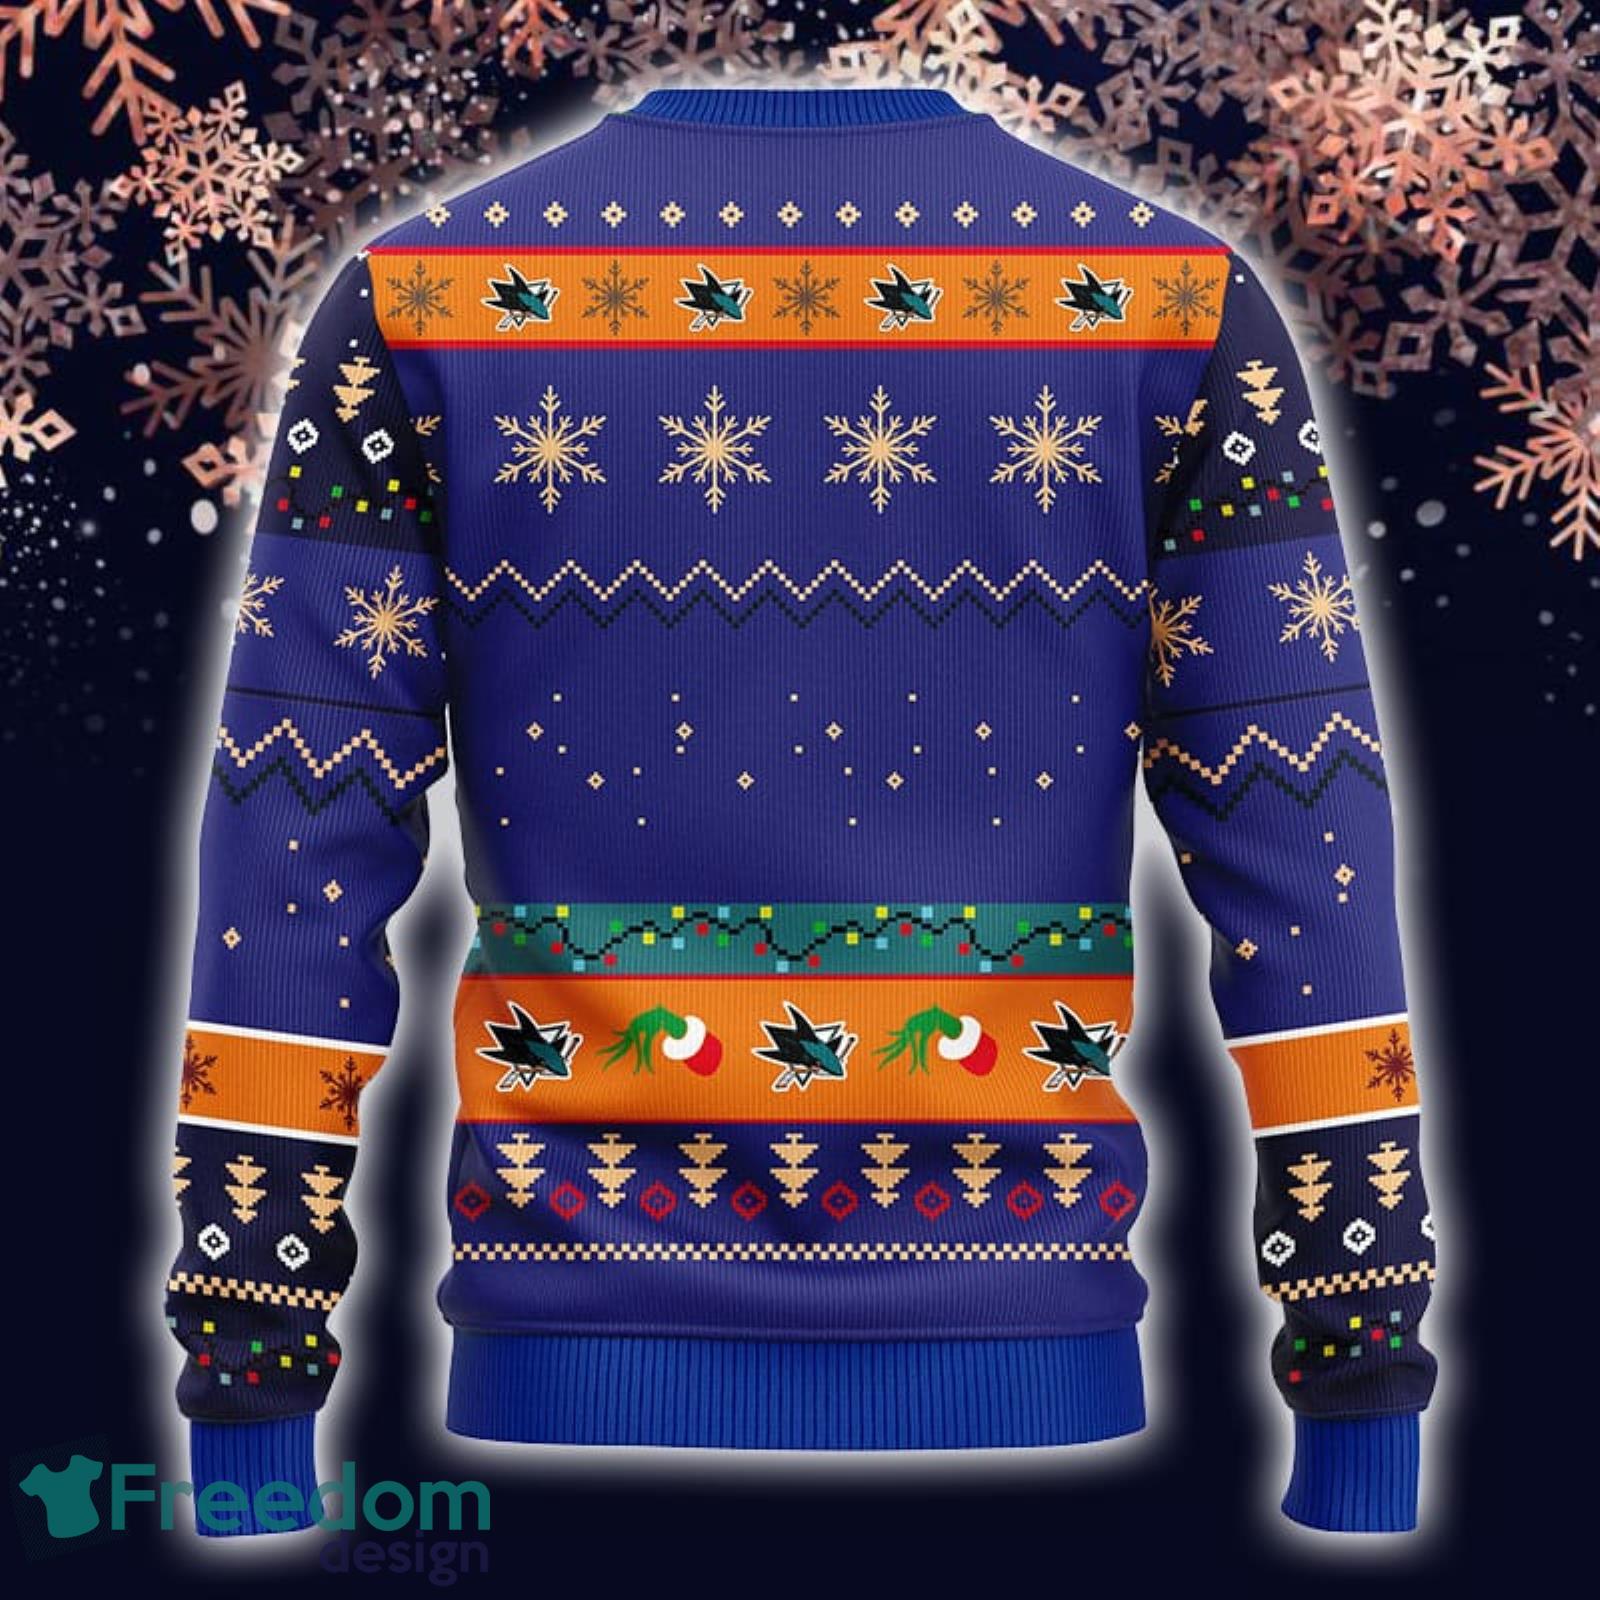 Nhl Anaheim Ducks Christmas Ugly Sweater Print Funny Grinch Gift For Hockey  Fans - Shibtee Clothing